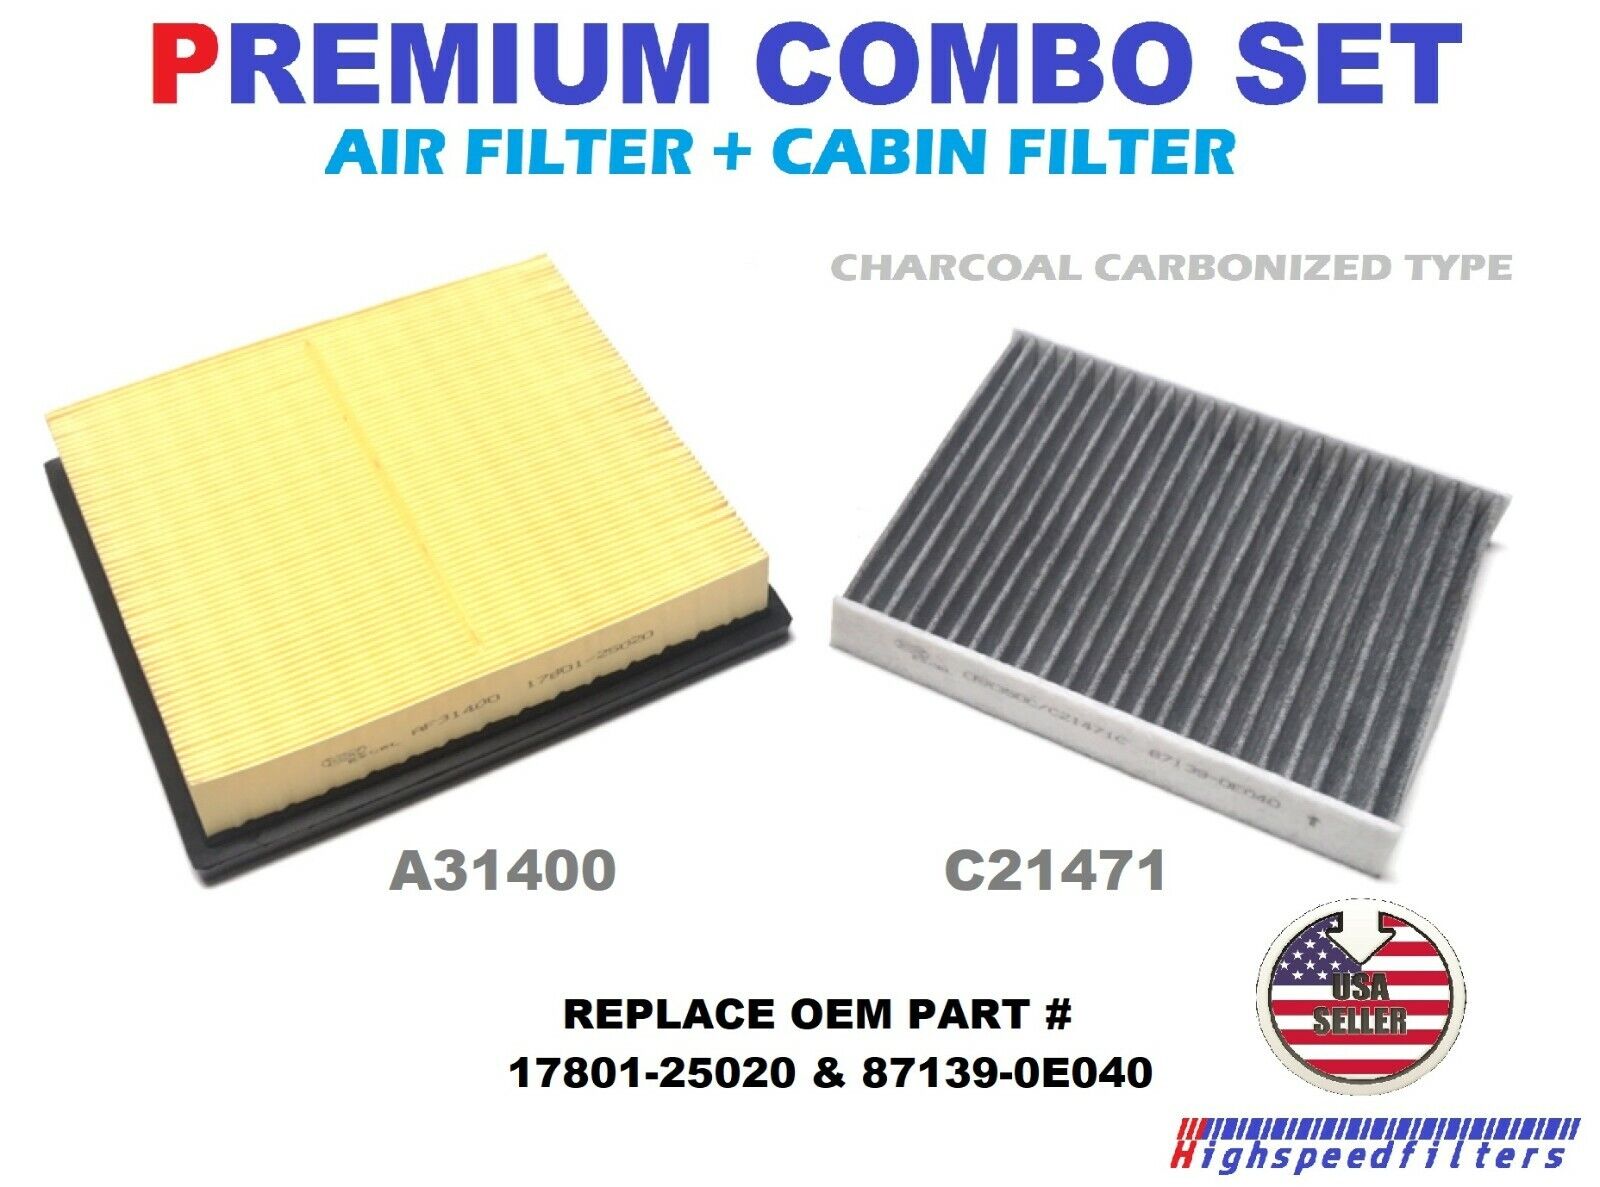 COMBO ENGINE AIR FILTER + CHARCOAL CABIN FILTER FOR NEW AVALON CAMRY RAV4 ES350